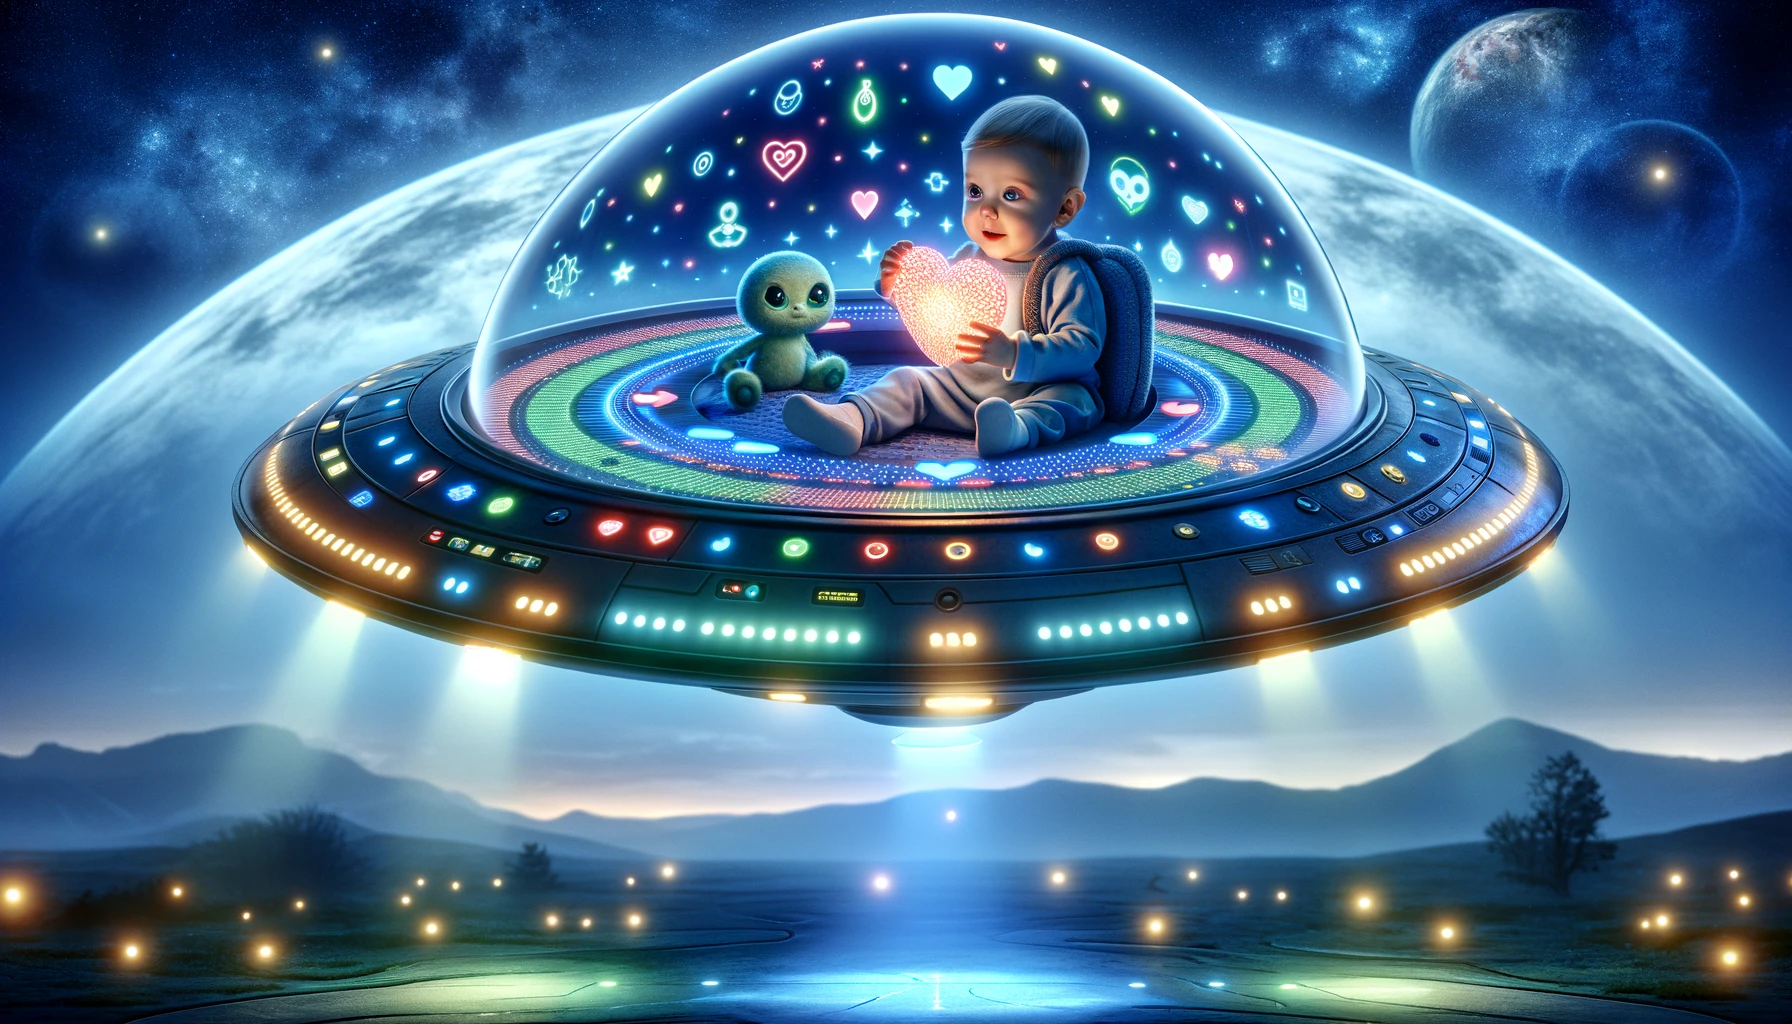 A captivating scene where a small child rides inside a UFO, learning about love. The child, with a look of wonder and curiosity, holds a glowing heart-shaped object that symbolizes love. The UFO's interior is futuristic, with interactive screens and colorful lights that display symbols and words related to love, like hearts and peaceful scenes. The background outside the UFO shows a serene space environment with stars and distant planets. This scene merges themes of adventure, innocence, and the universal concept of love.